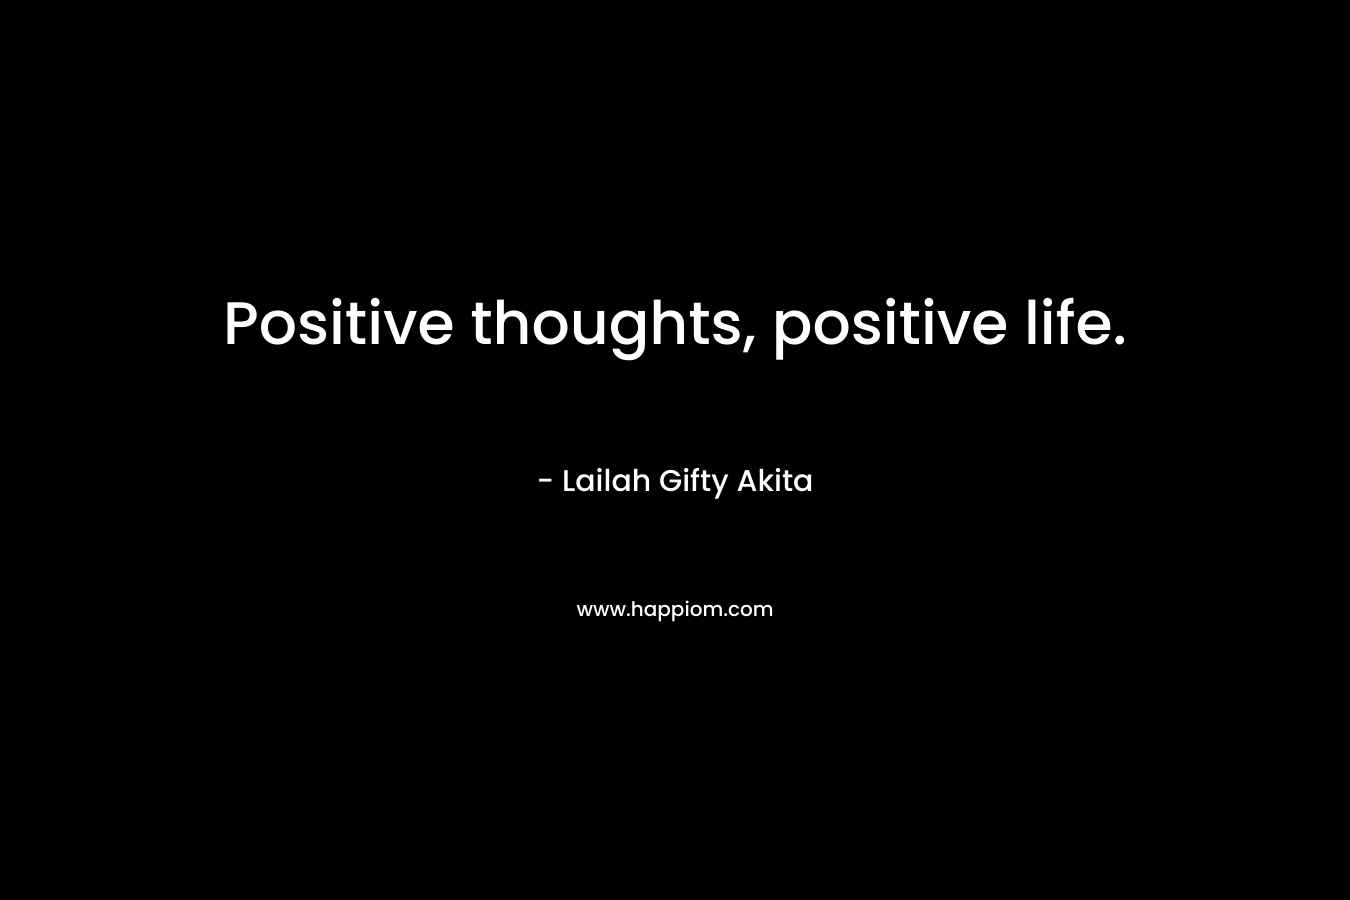 Positive thoughts, positive life.